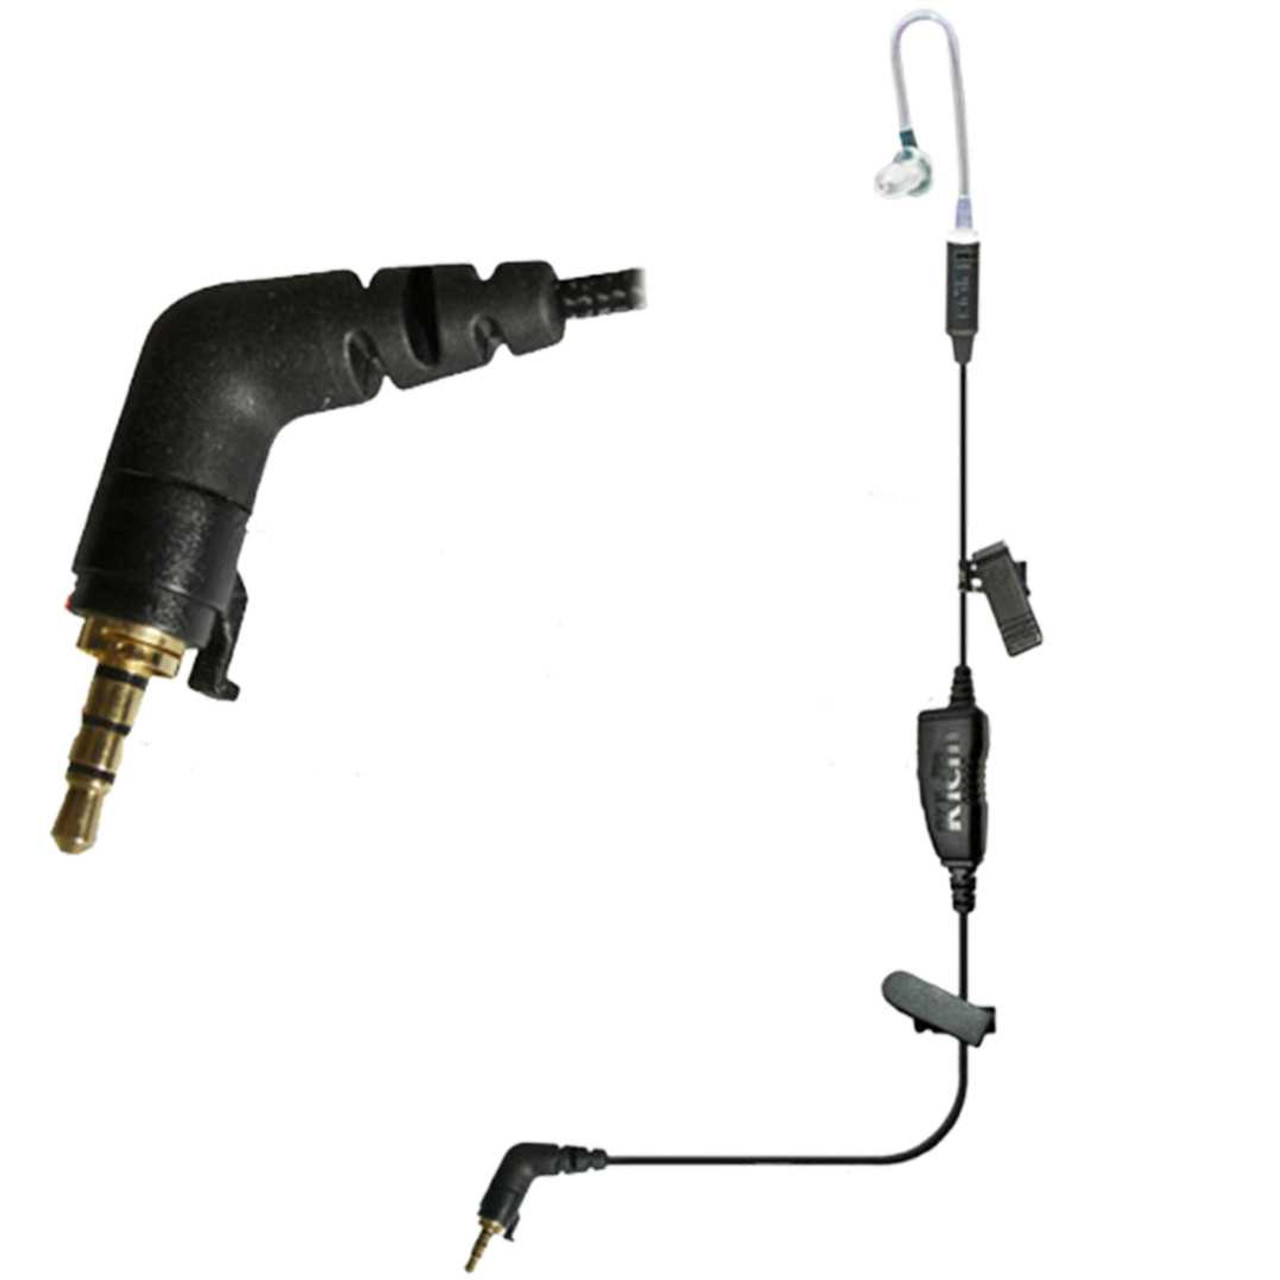 Star-Pro Single-Wire Earpiece with Camlock Connector for Kyocera [[product_type]] kleinelectronics.com 59.95